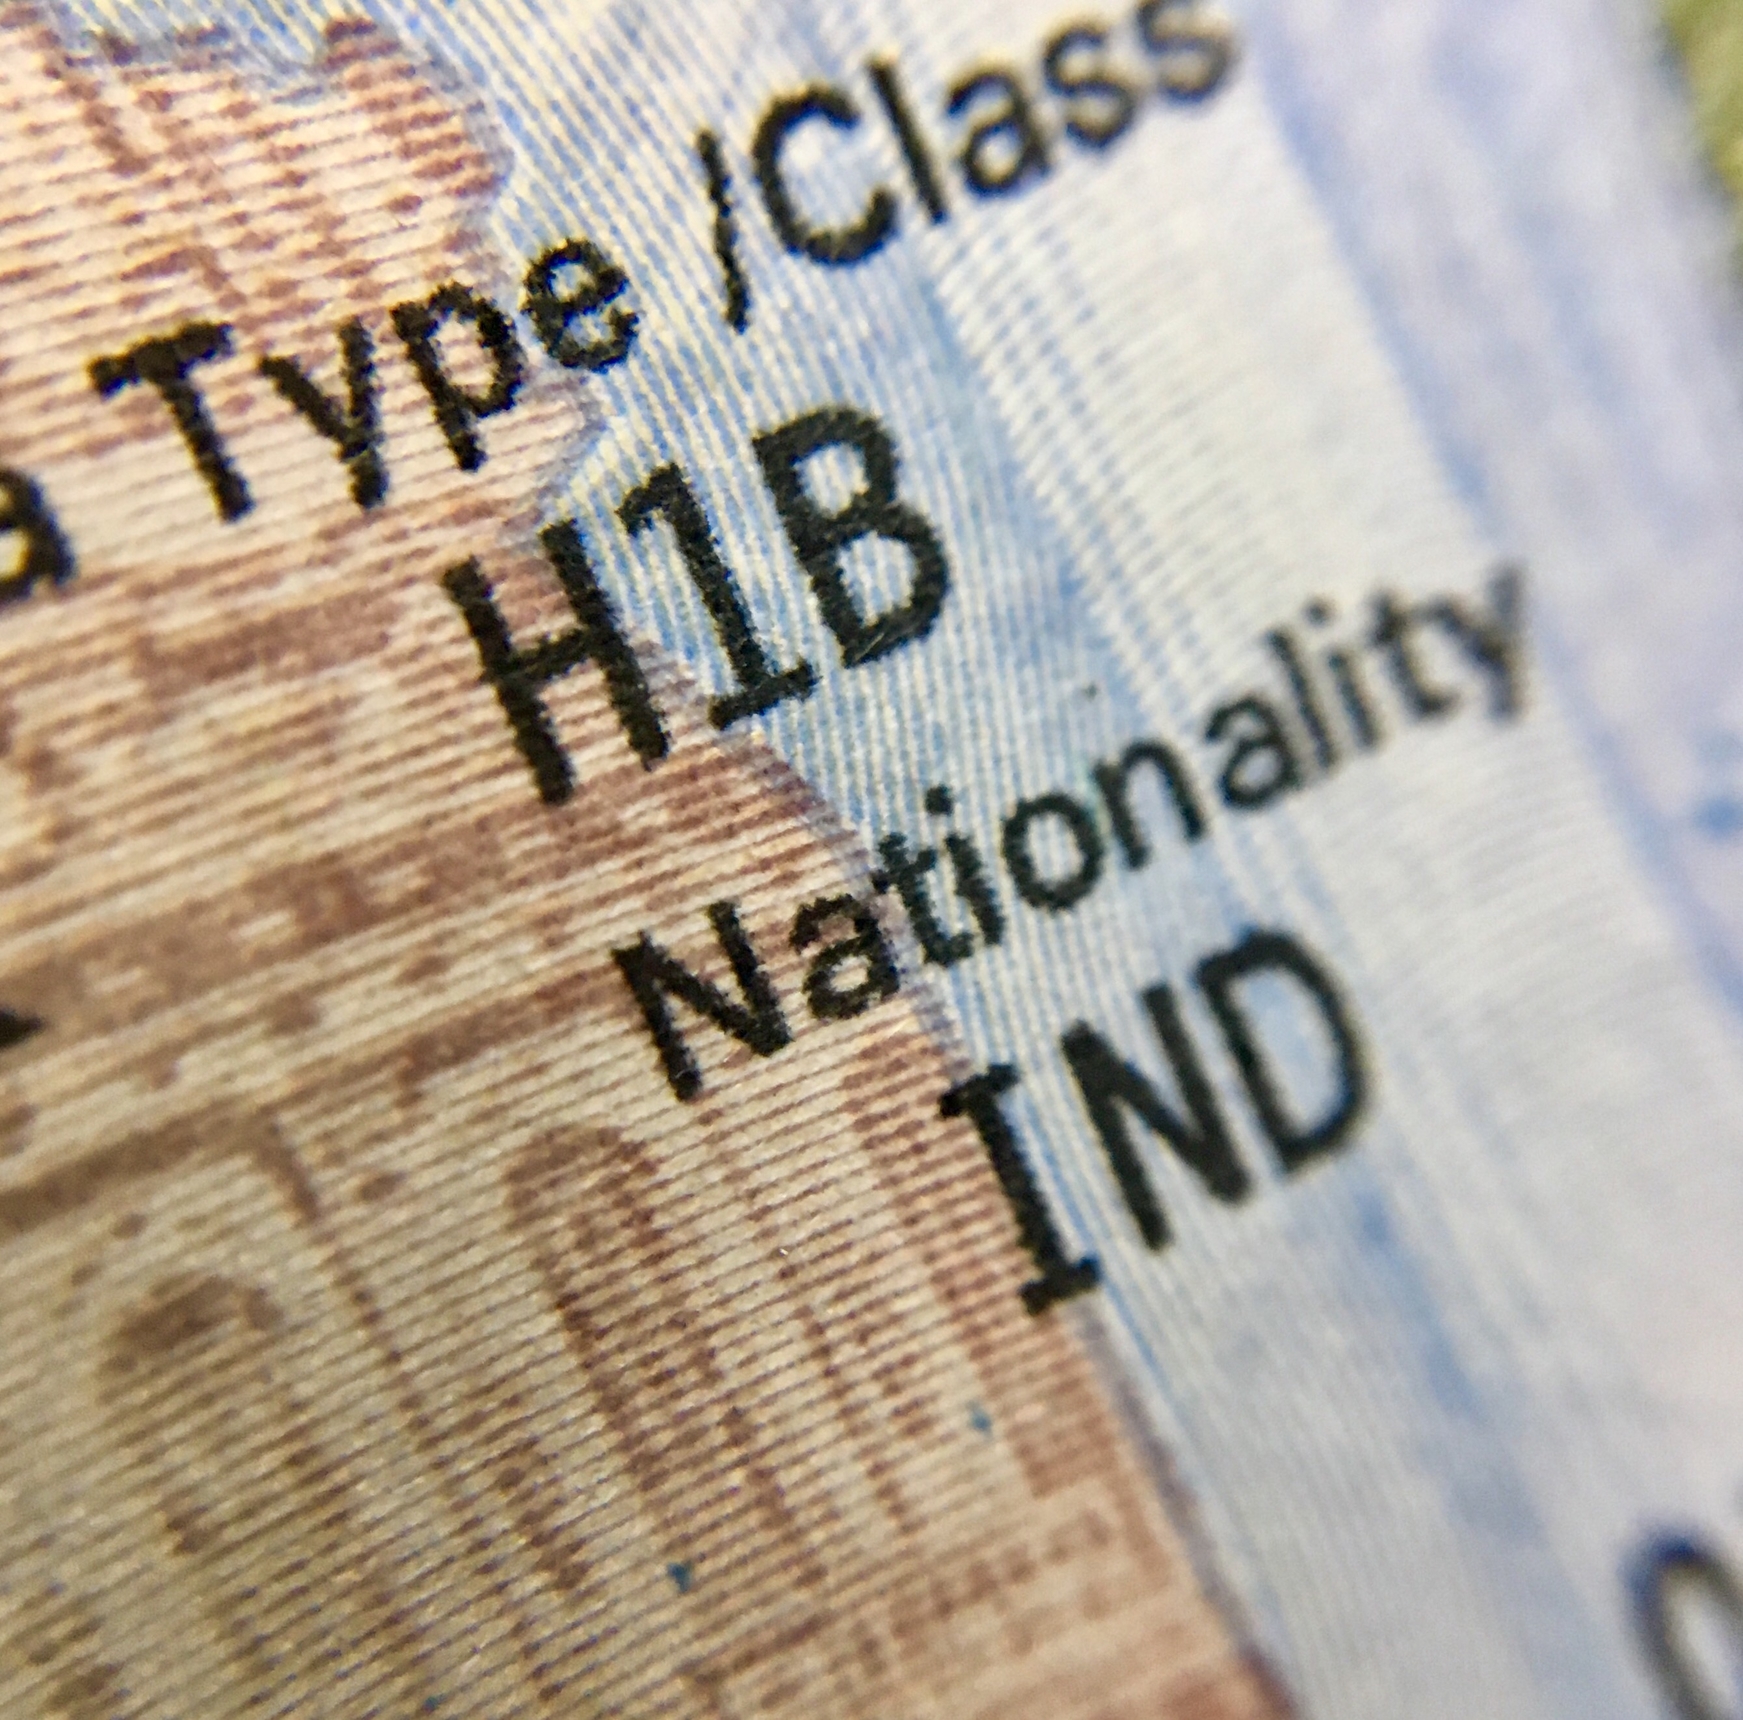 Biden Administration Lifts Rule to Narrow H-1B Definition of “Specialty Occupation”